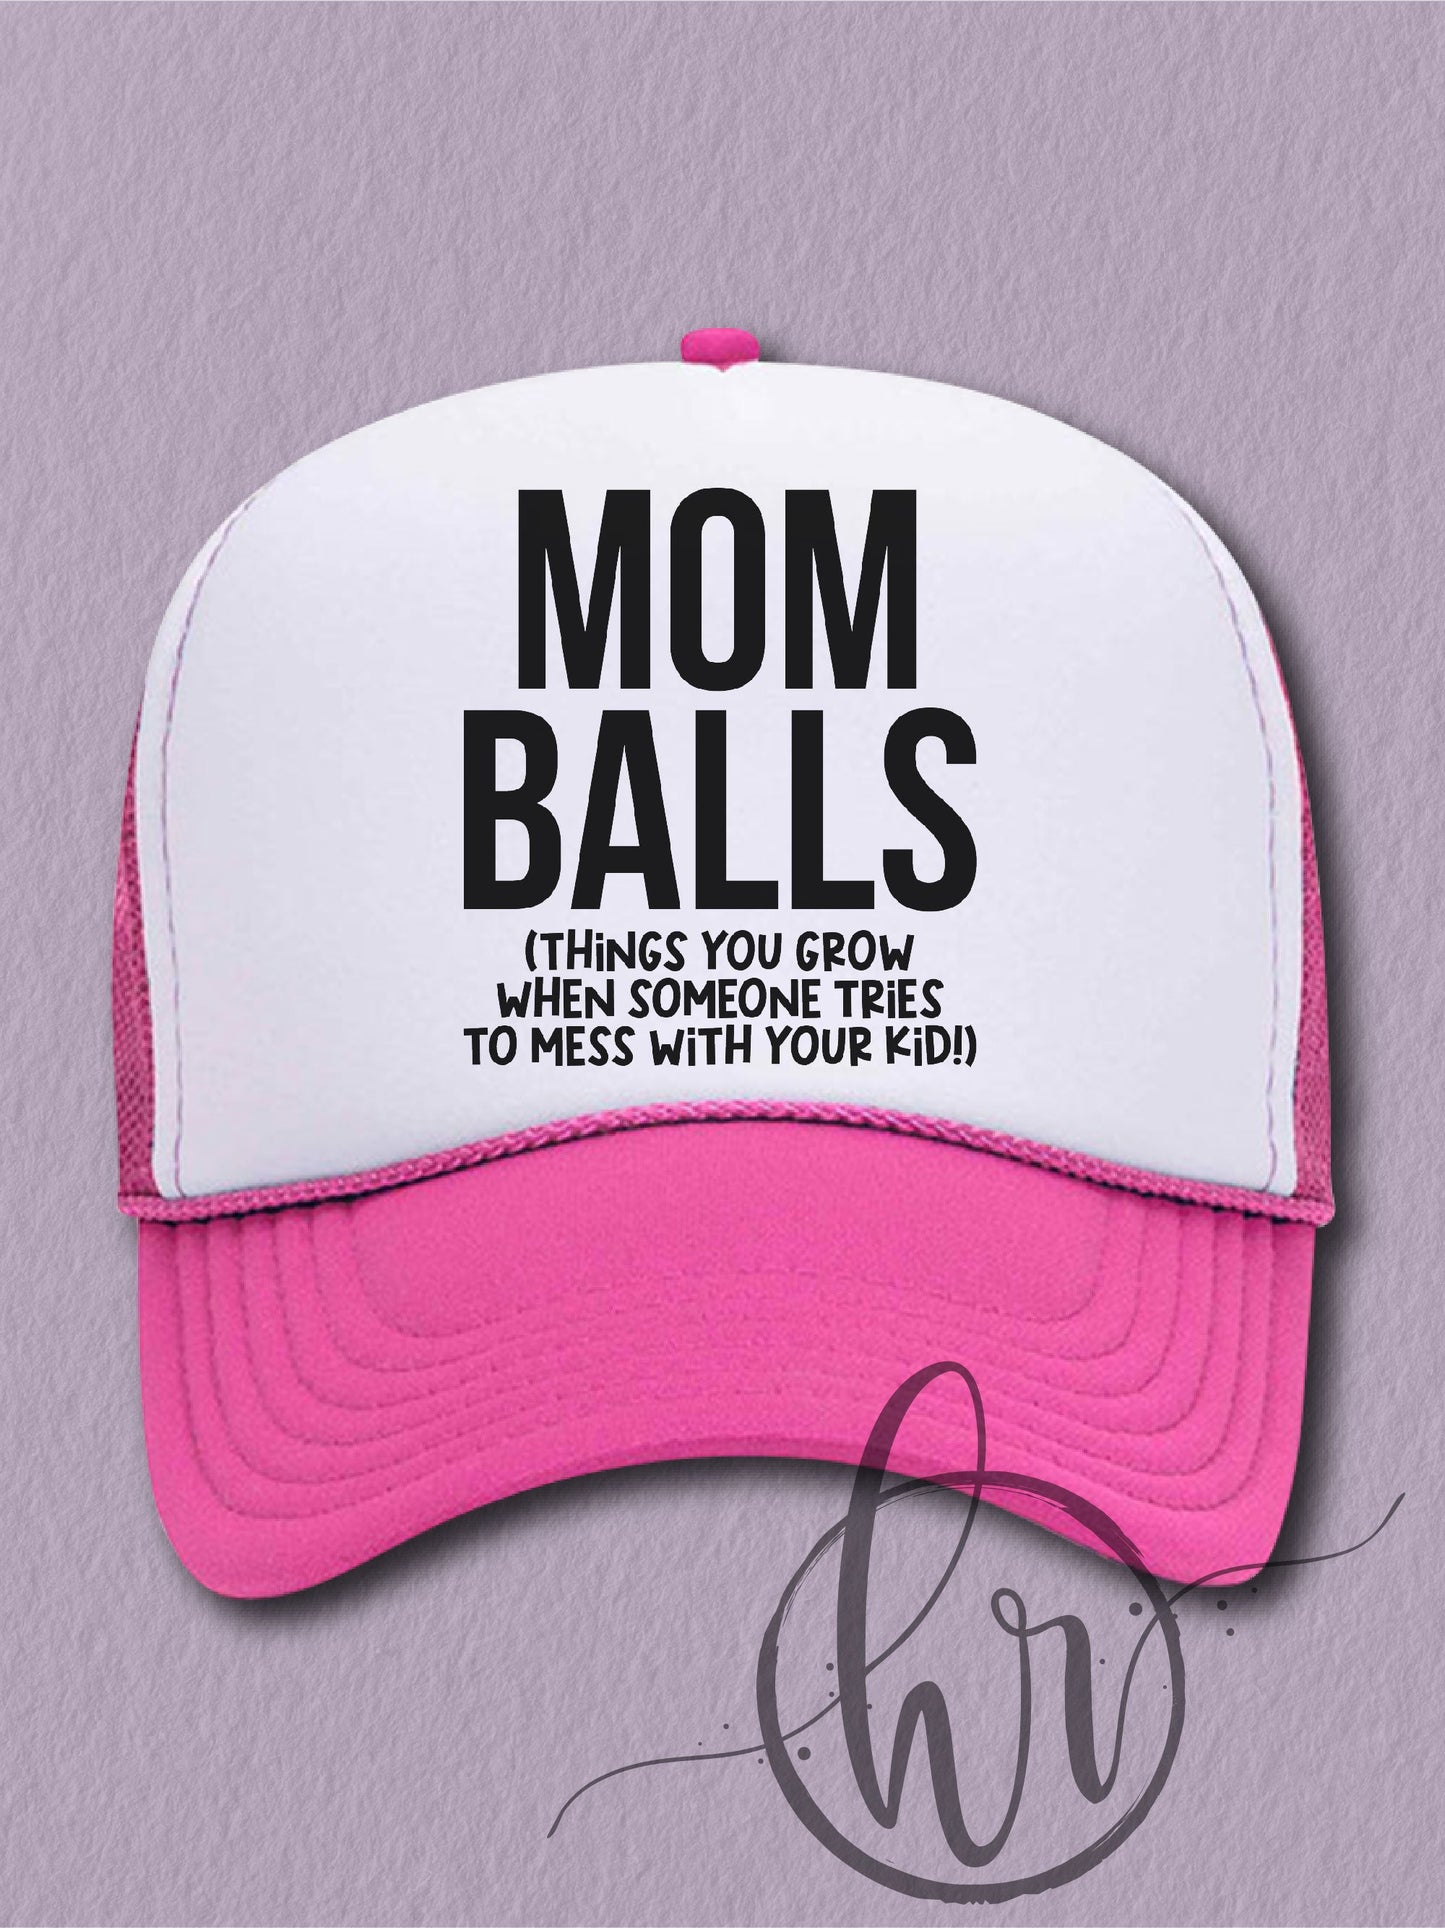 Mom Balls (Things You Grow When Someone Tries To Mess With Your Kid!) - (Hat)